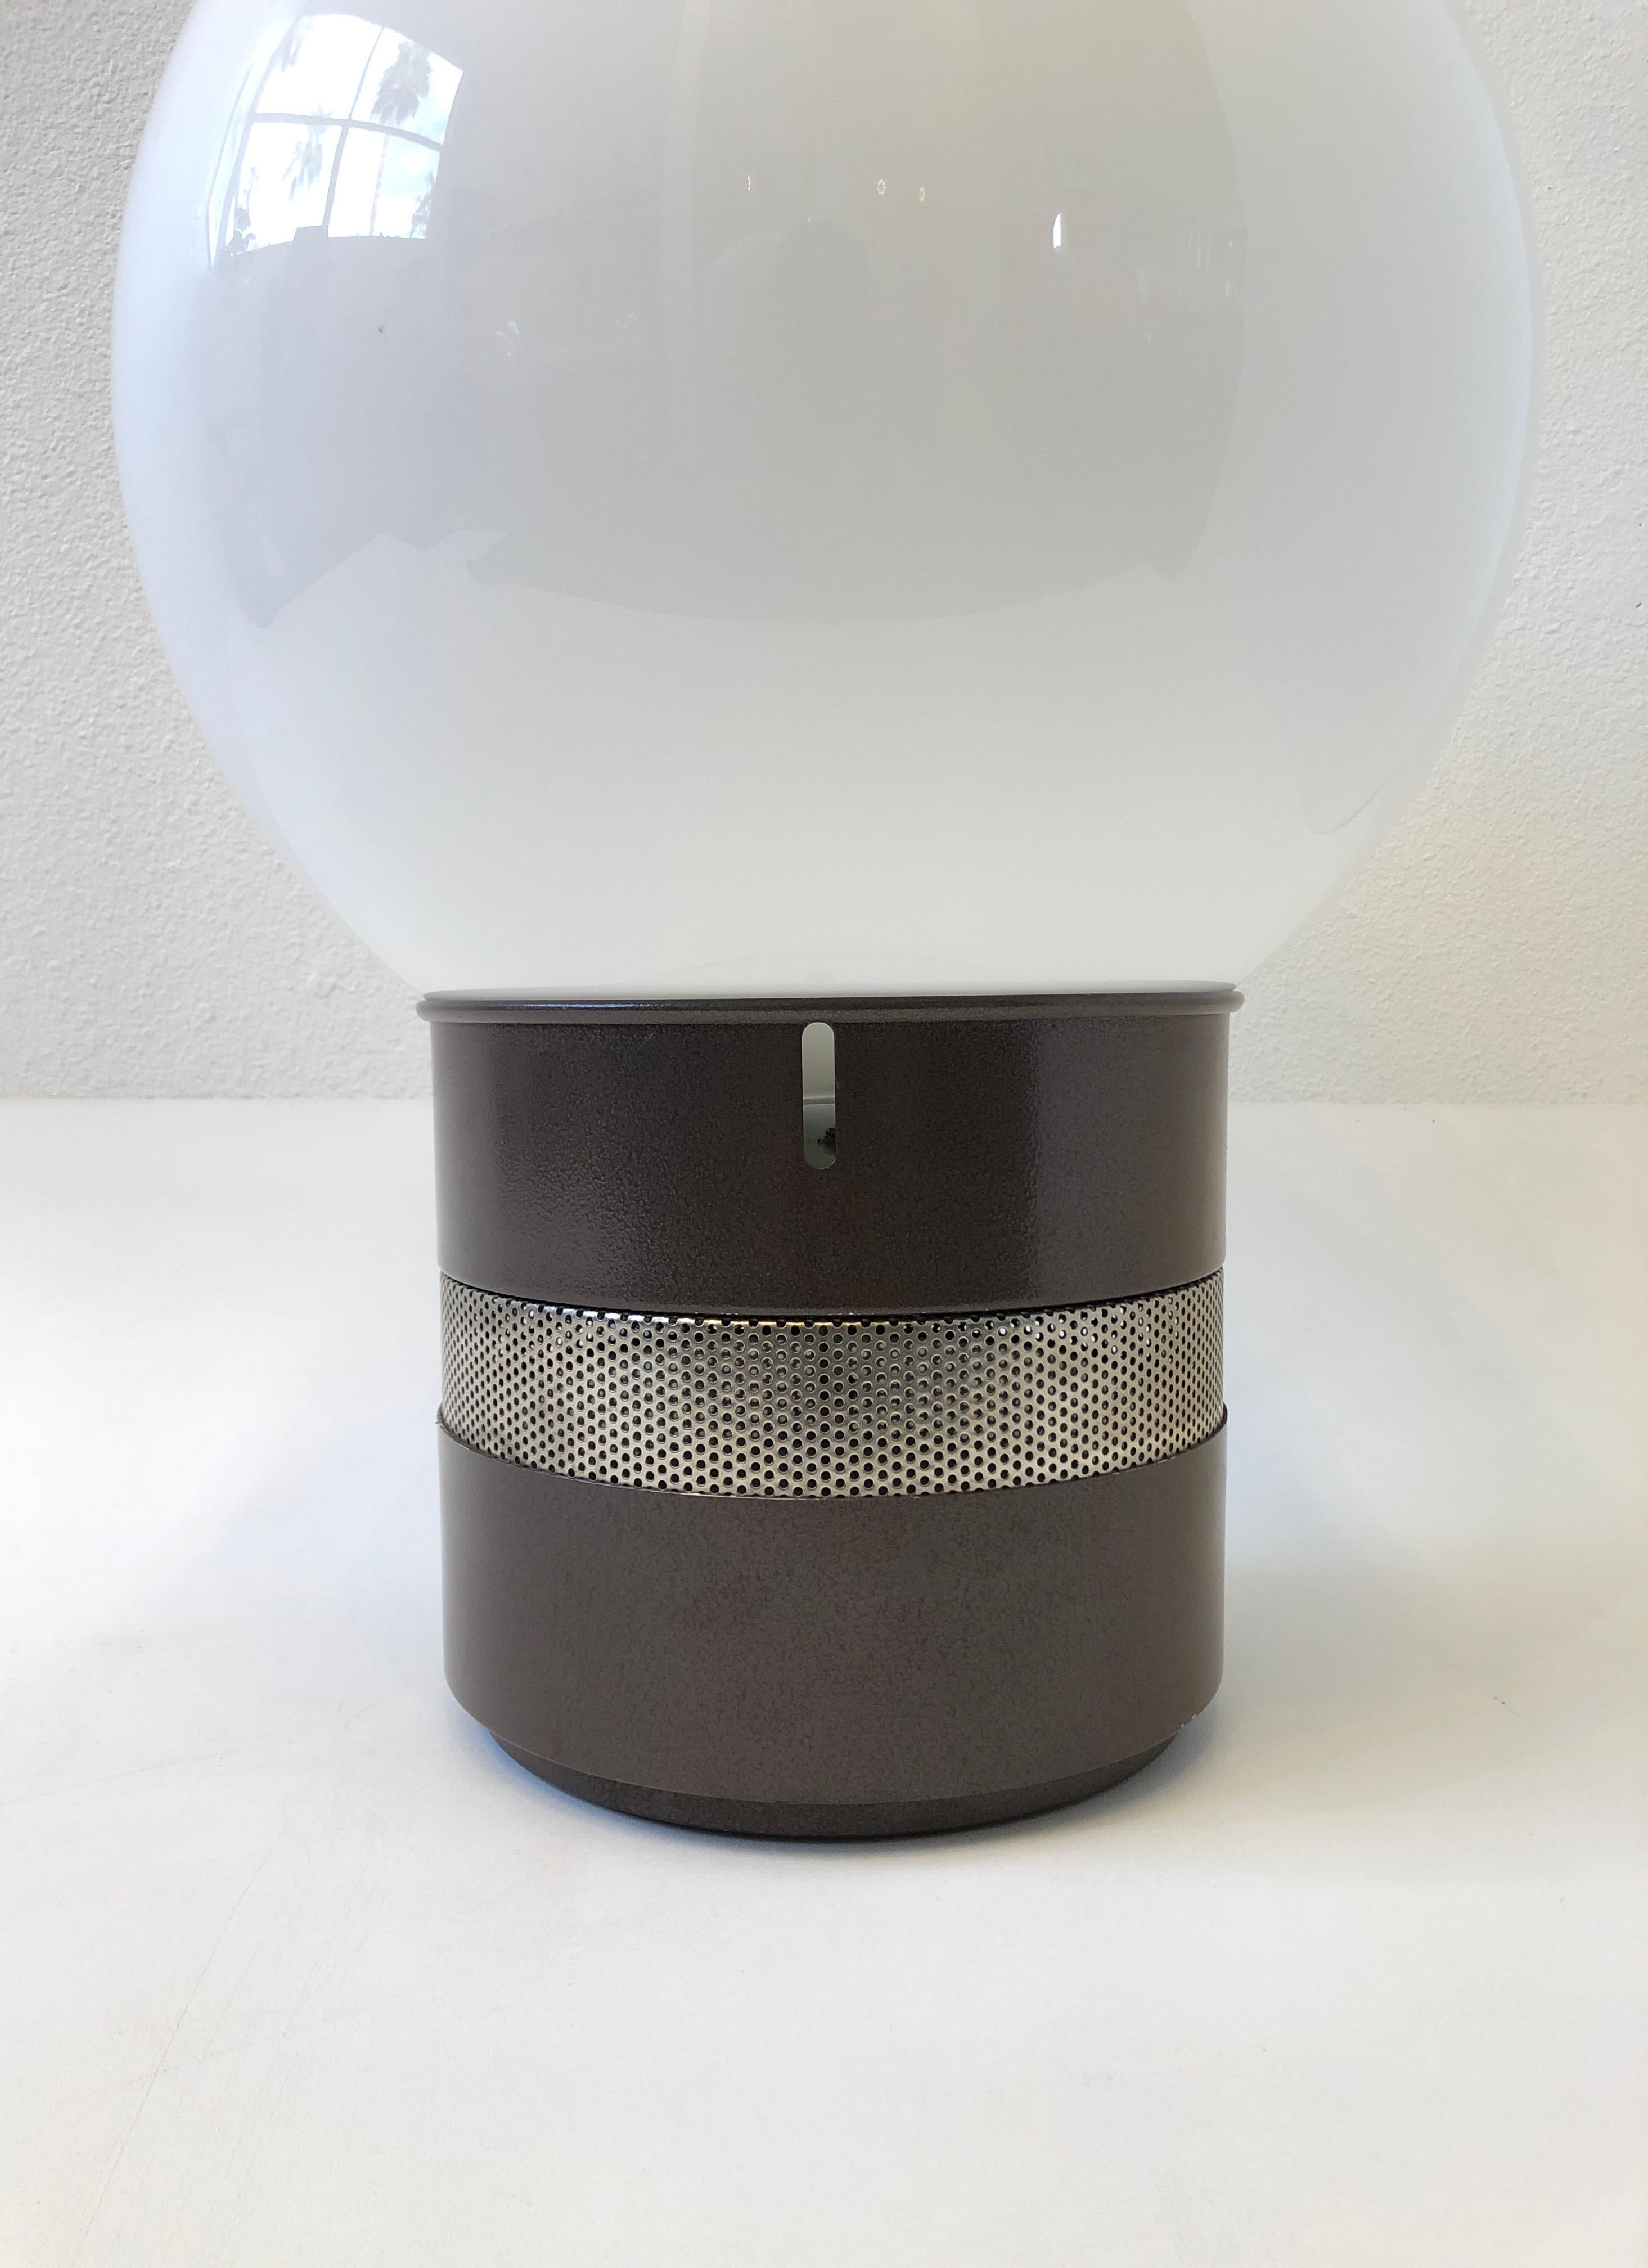 1970’s “Mezzoracolo” table lamp by renowned Italian Architect Gae Aulenti. 
The lamp is constructed of steel that’s powder coated brown and the shade is hand blown white glass globe. 
It takes one regular Edison lightbulb 75w max and two small